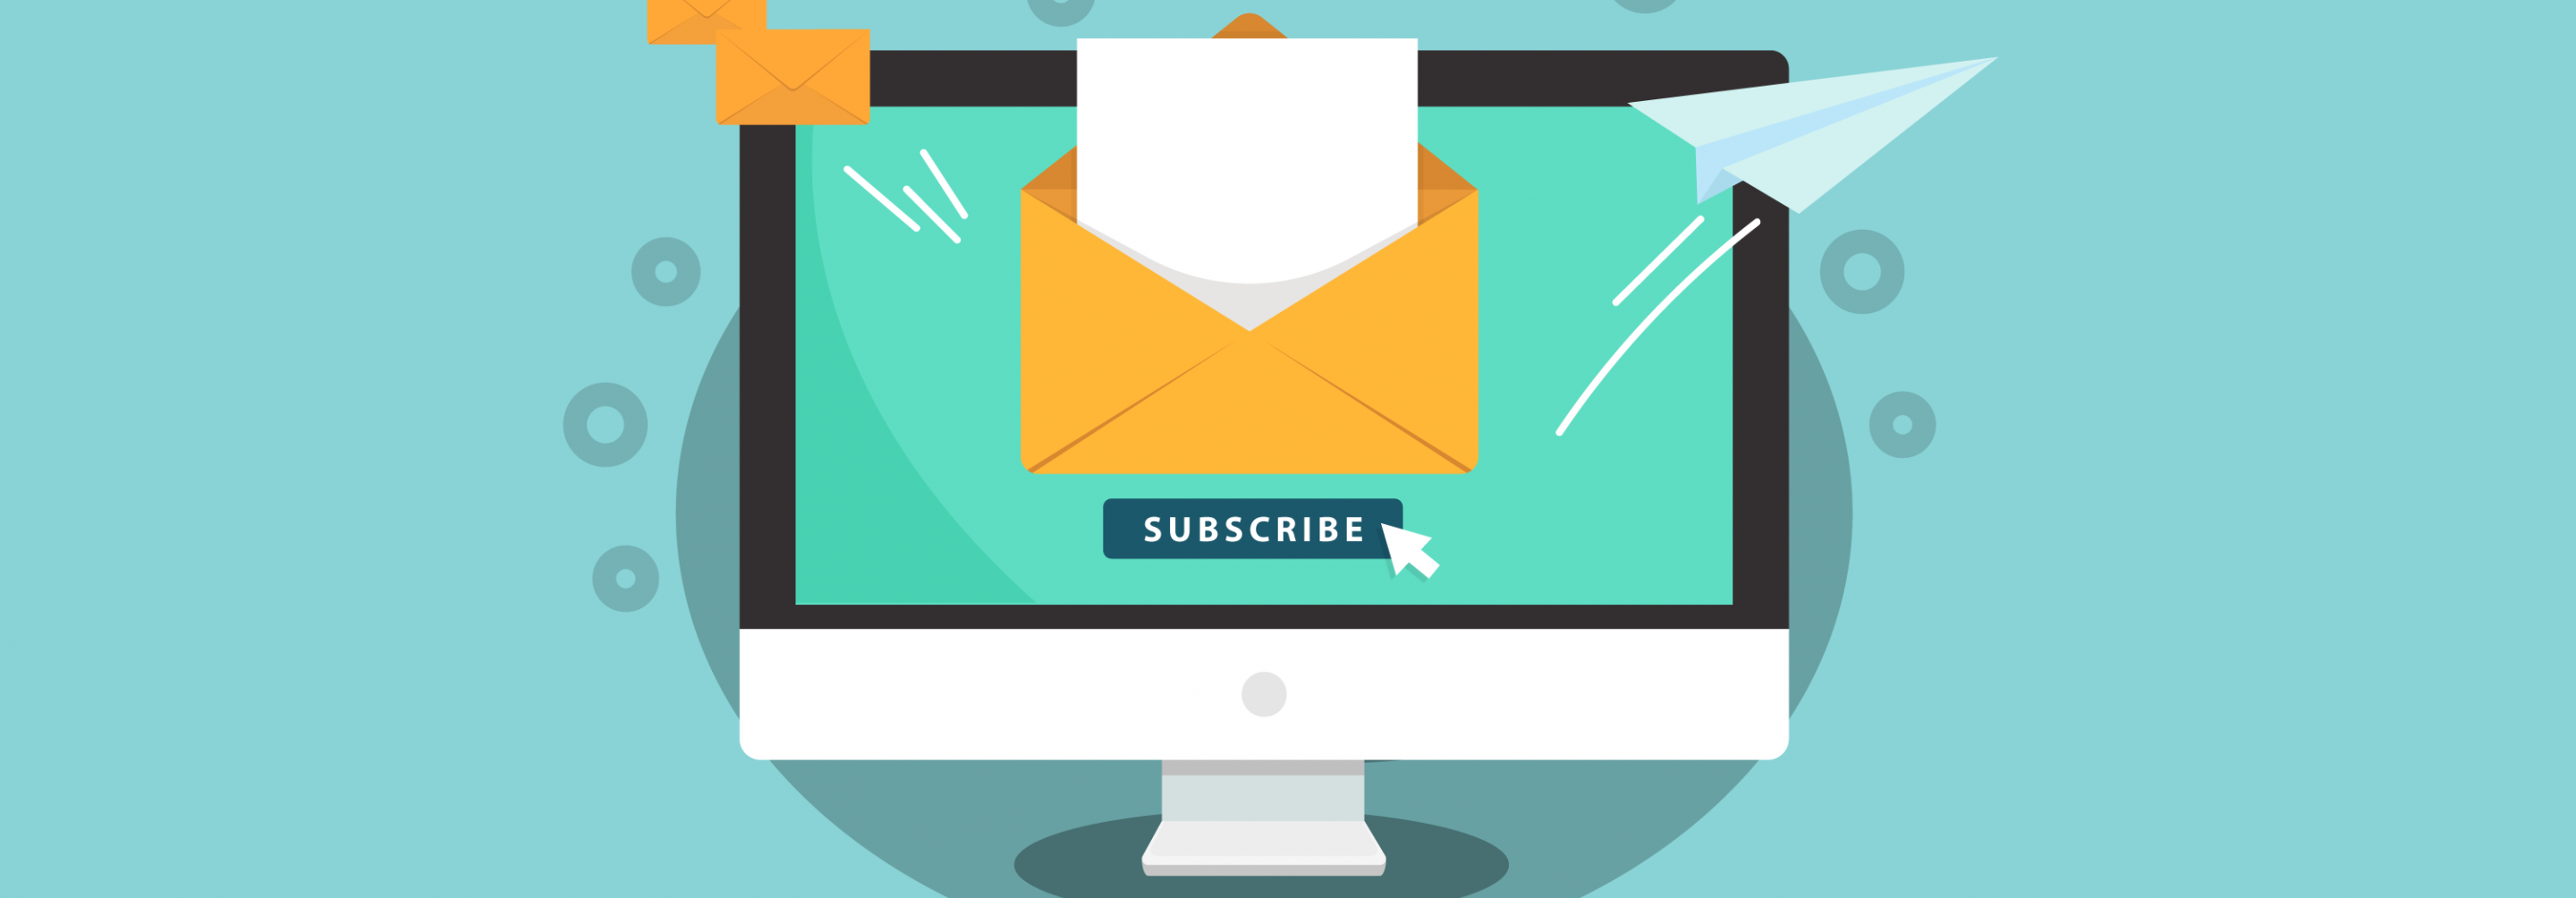 Illustration of a computer screen and Subscribe button with mail